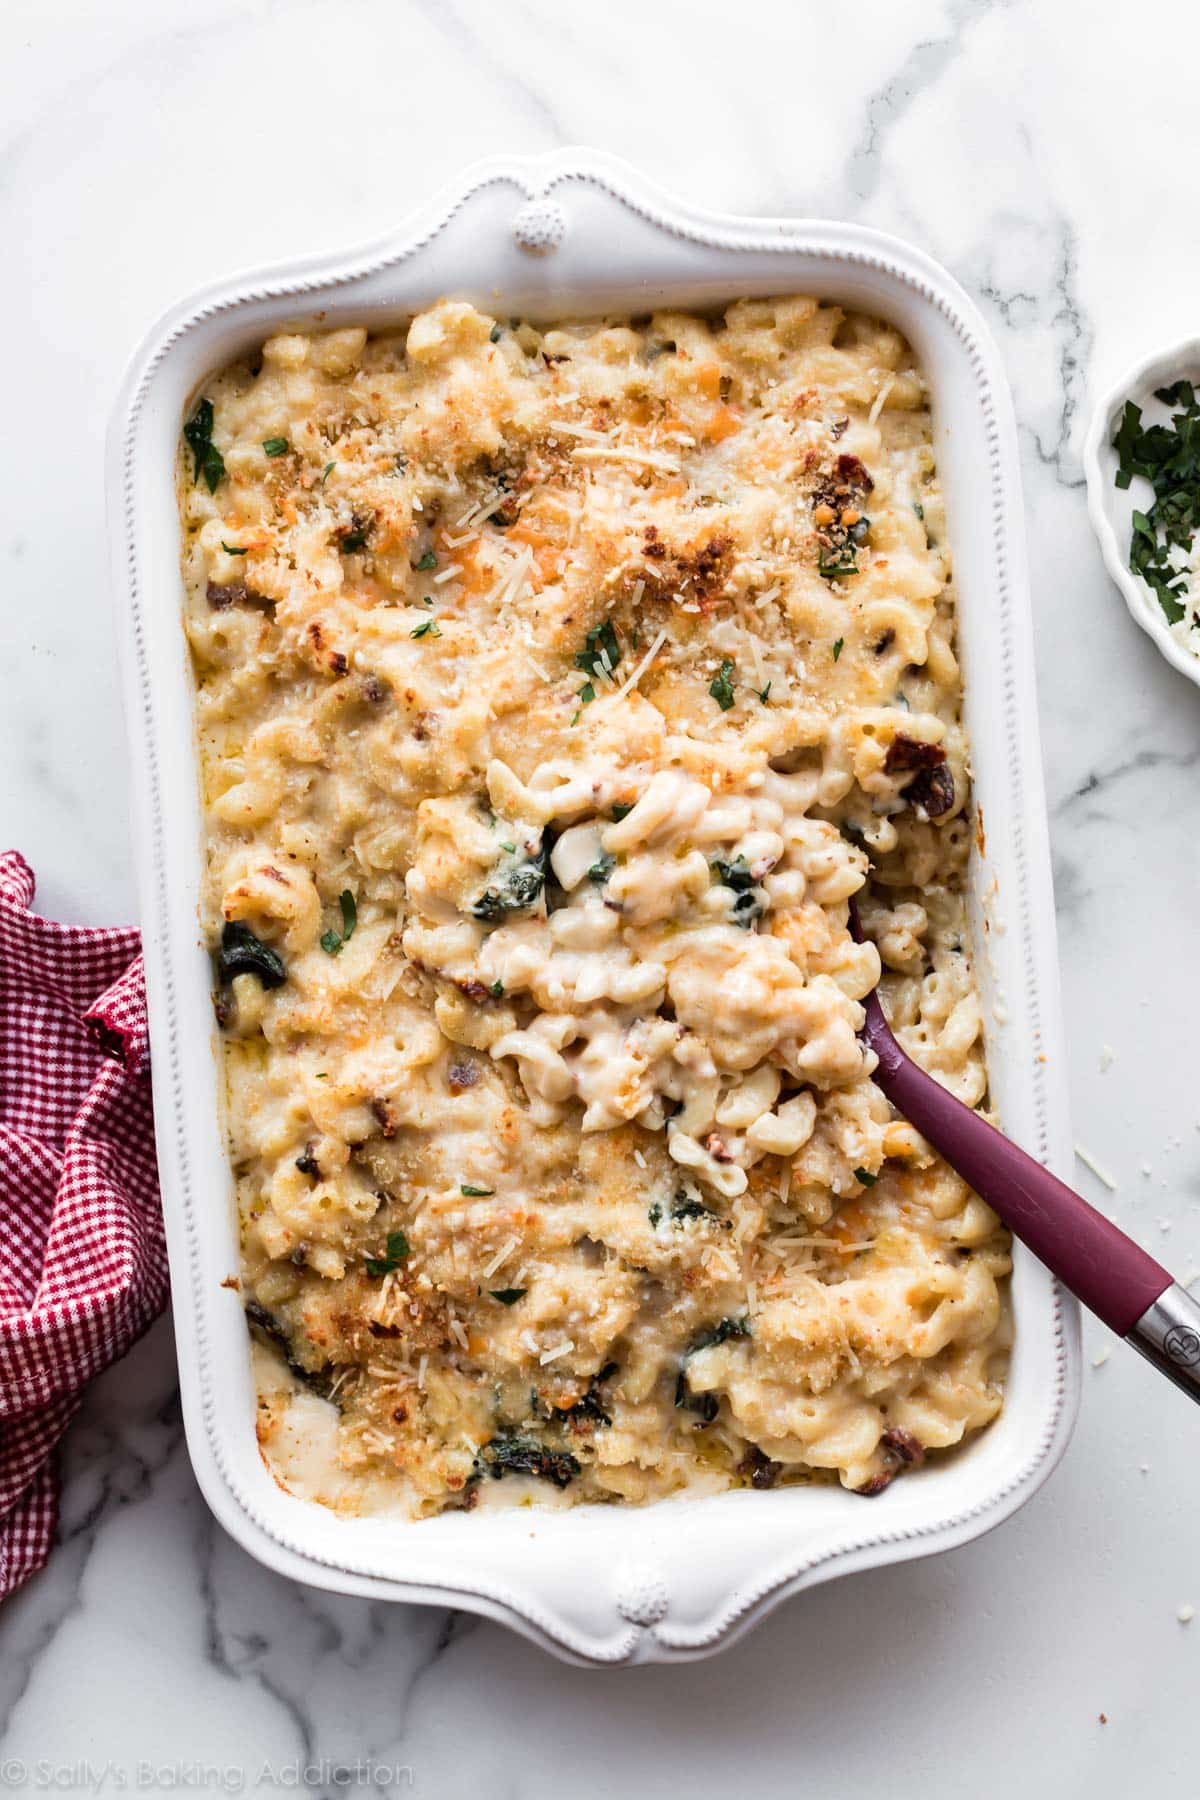 Baked macaroni and cheese casserole